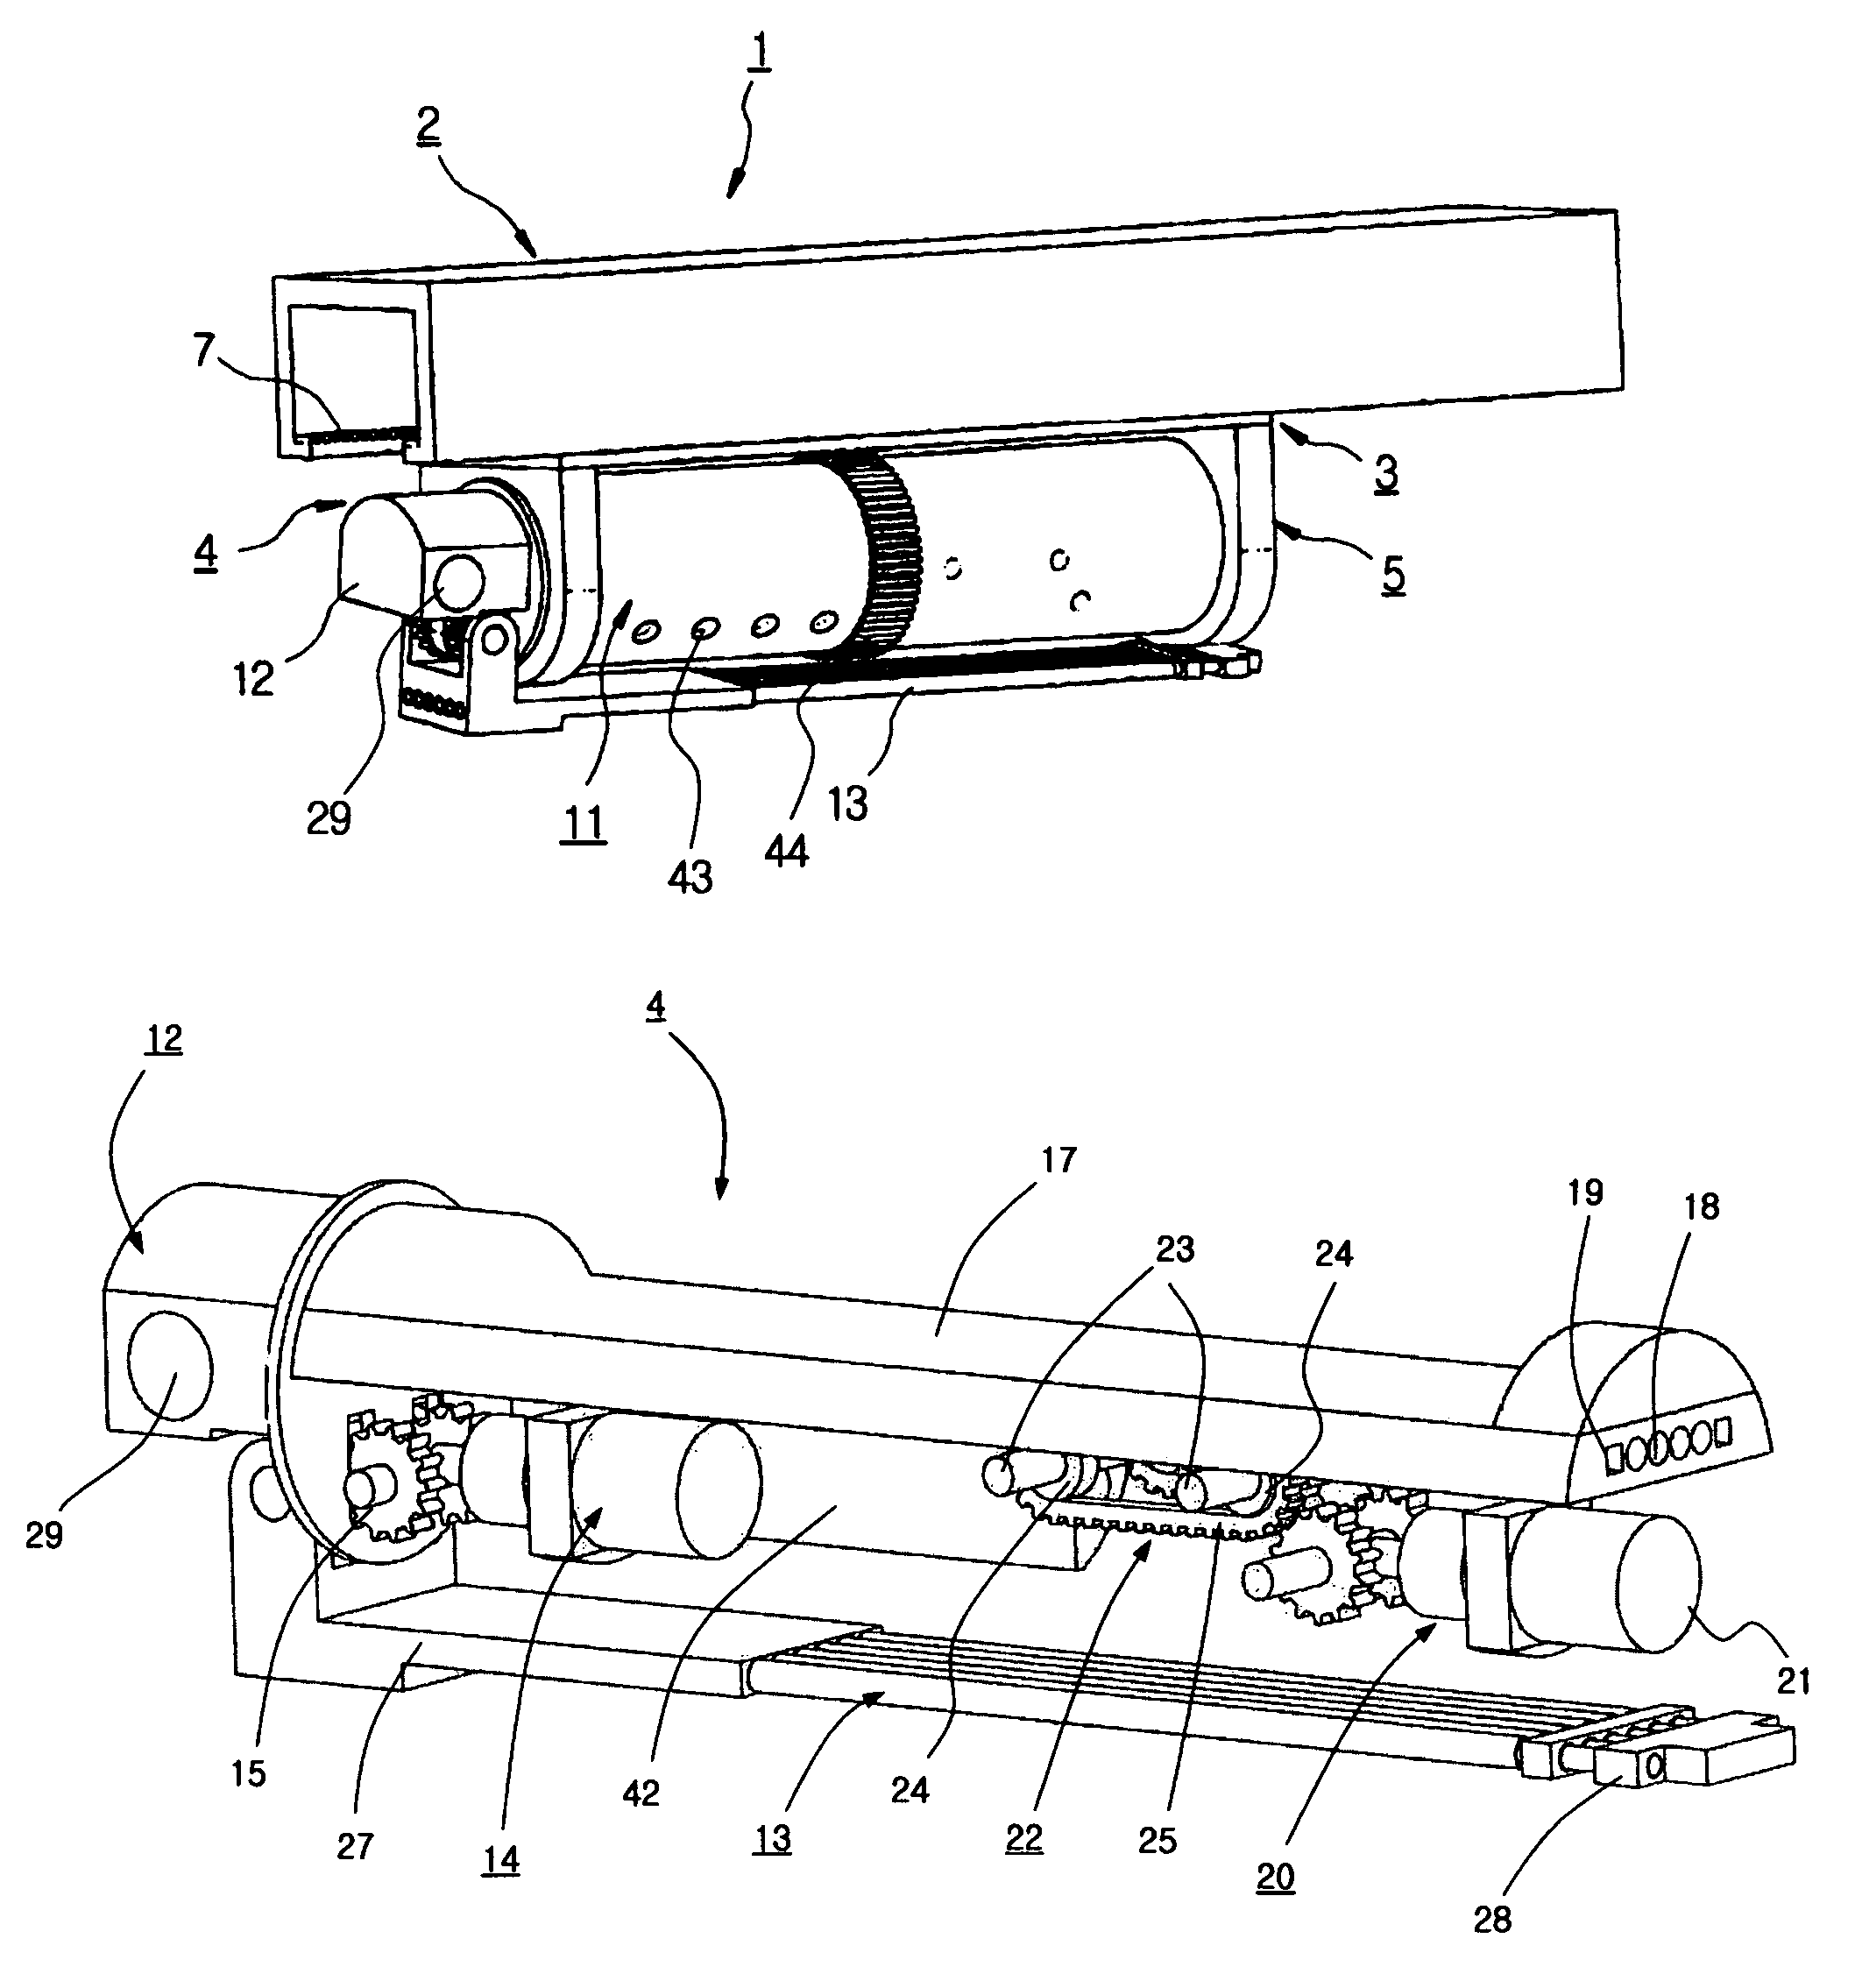 Lance system for inter-tube inspecting and lancing as well as barrel spraying of heat transfer tubes of steam generator in nuclear power plant